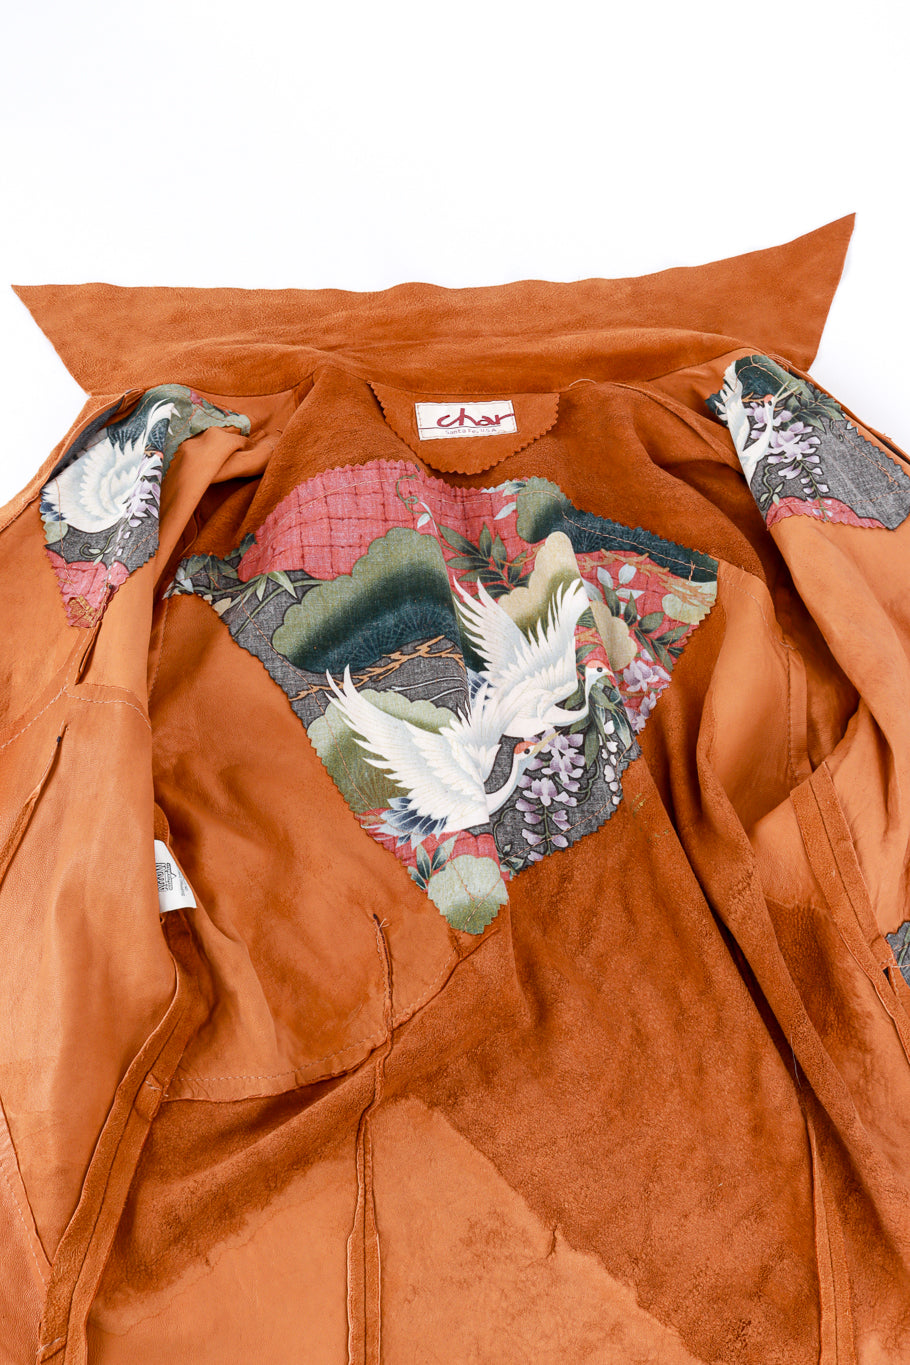 Chinoiserie Suede Jacket by Char lining detail @RECESS LA